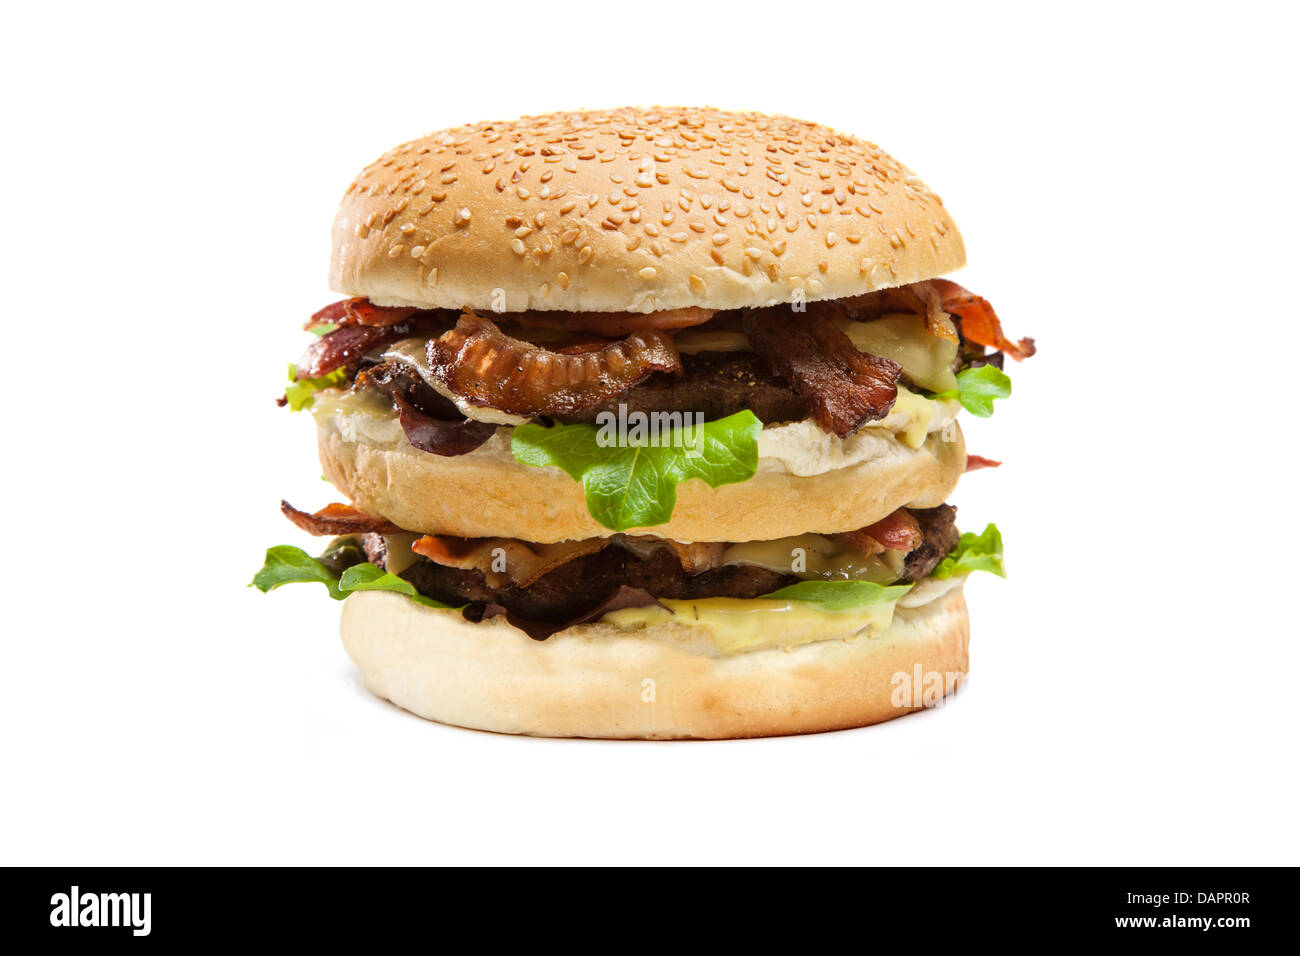 Juicy double hamburger with cheese and bacon isolated on white background Stock Photo